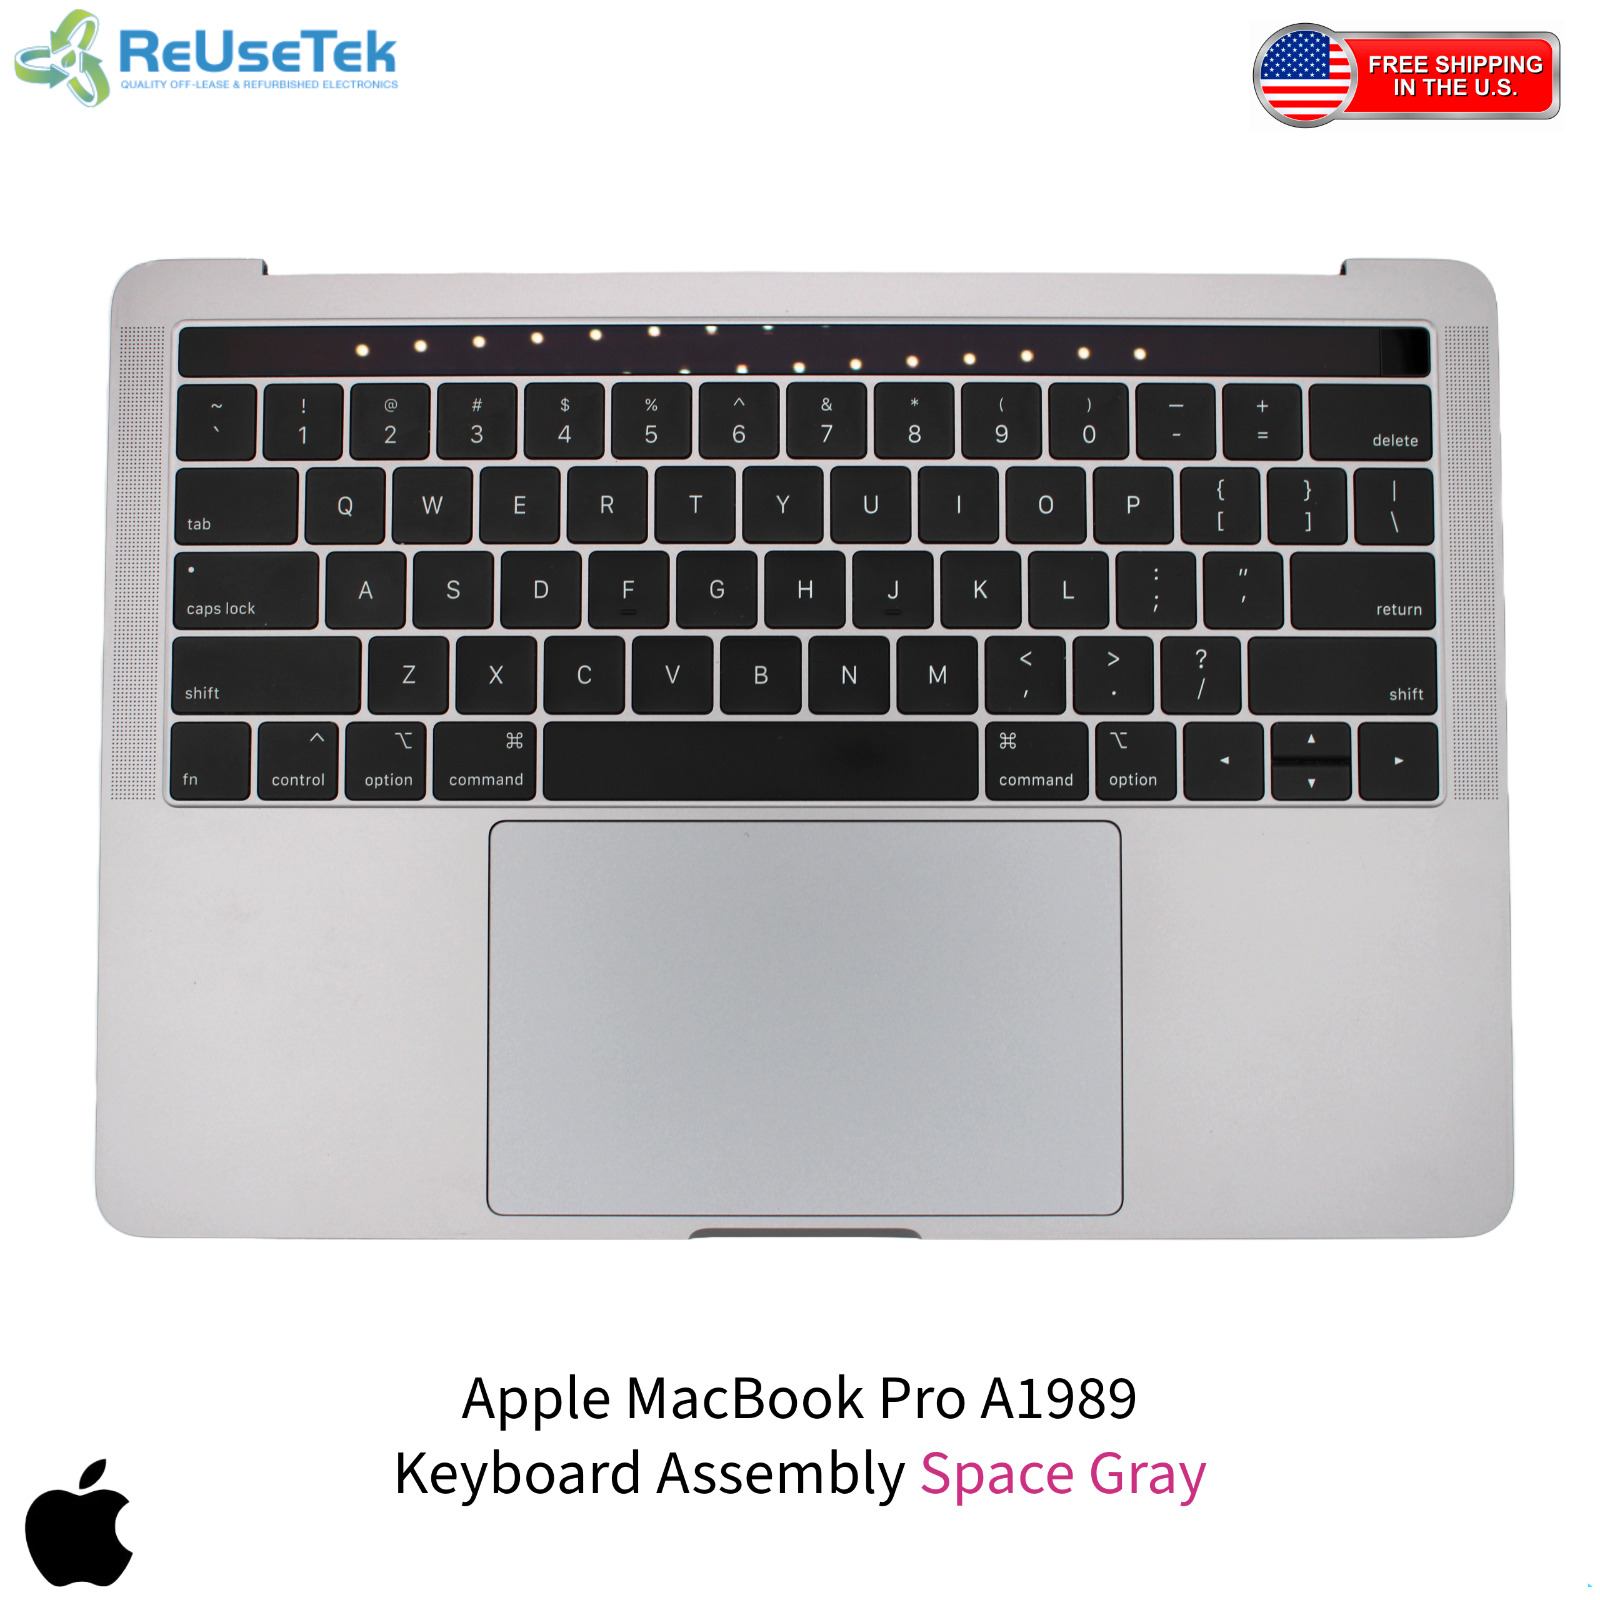 Apple MacBook Pro A1989 Keyboard Assembly Space Gray